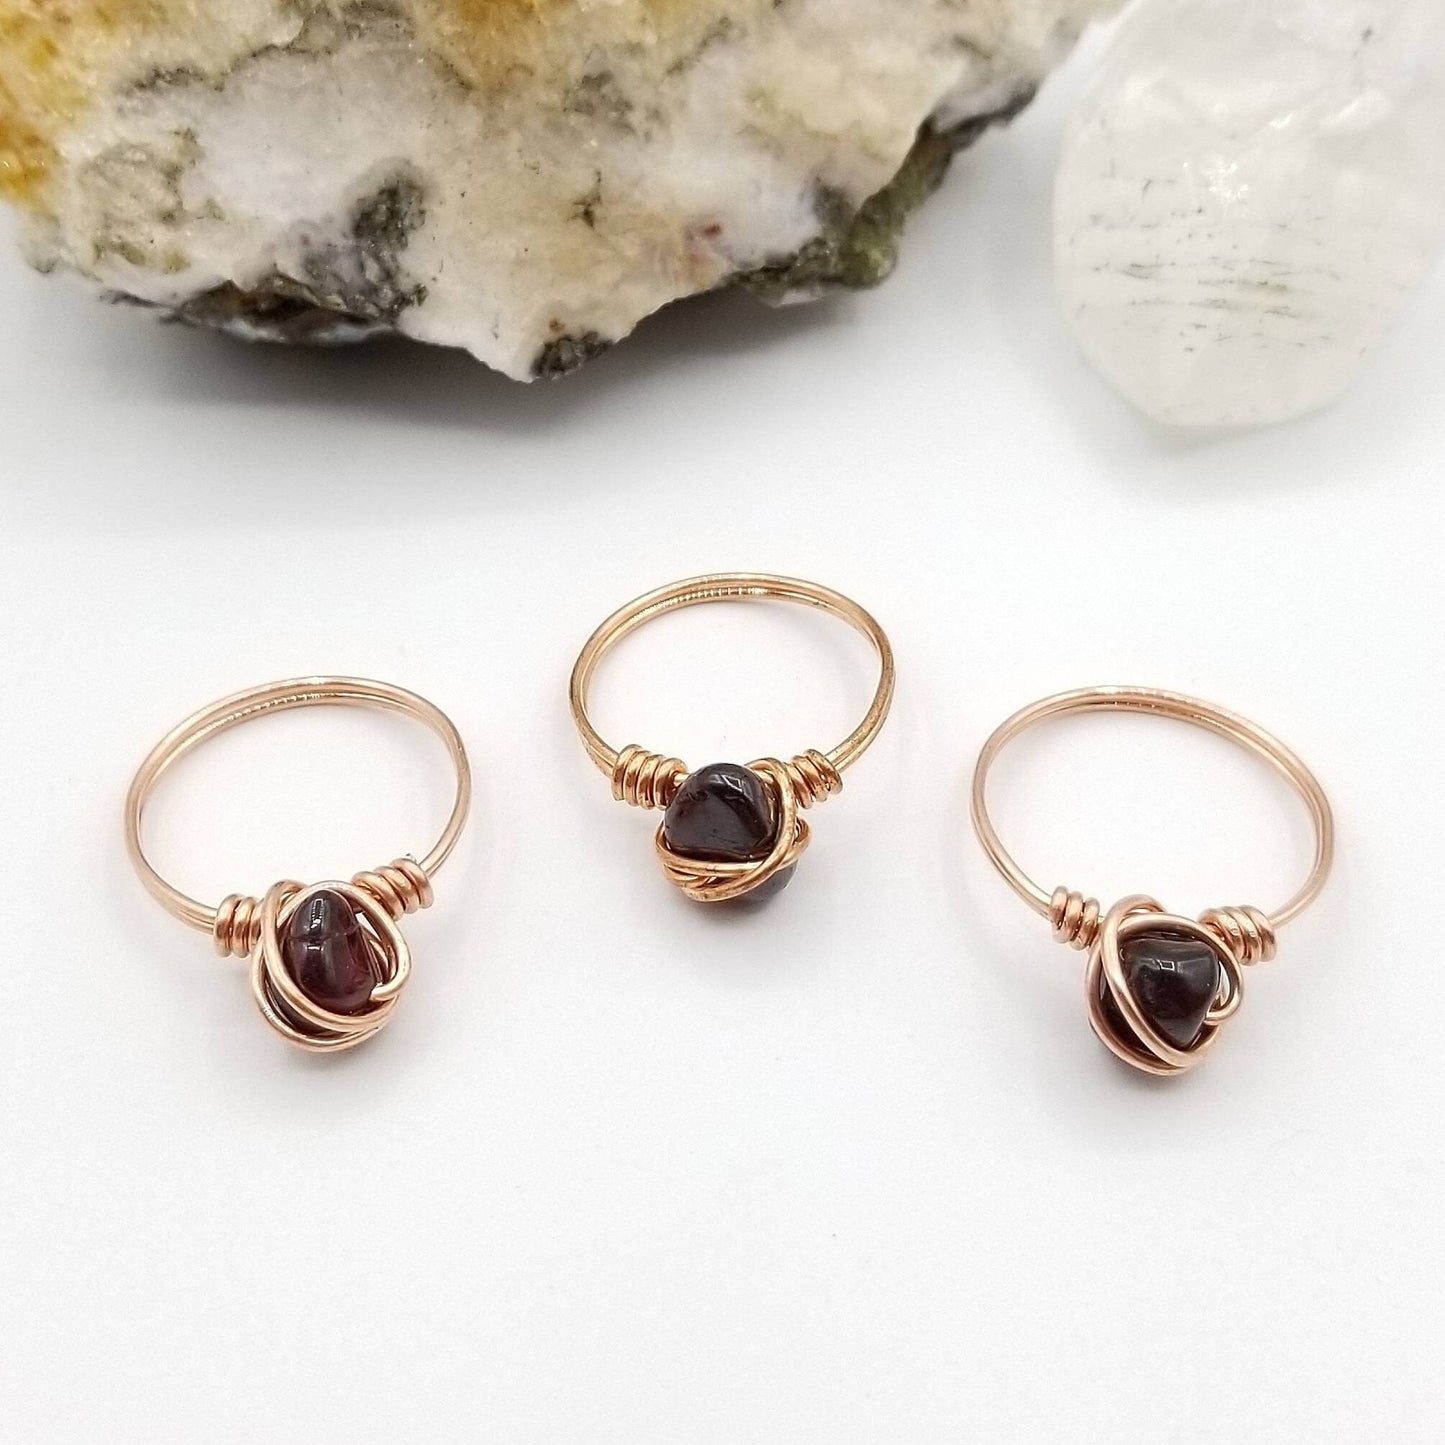 Garnet Ring, Copper Wire Wrapped Ring, January Birthstone, January Necklace